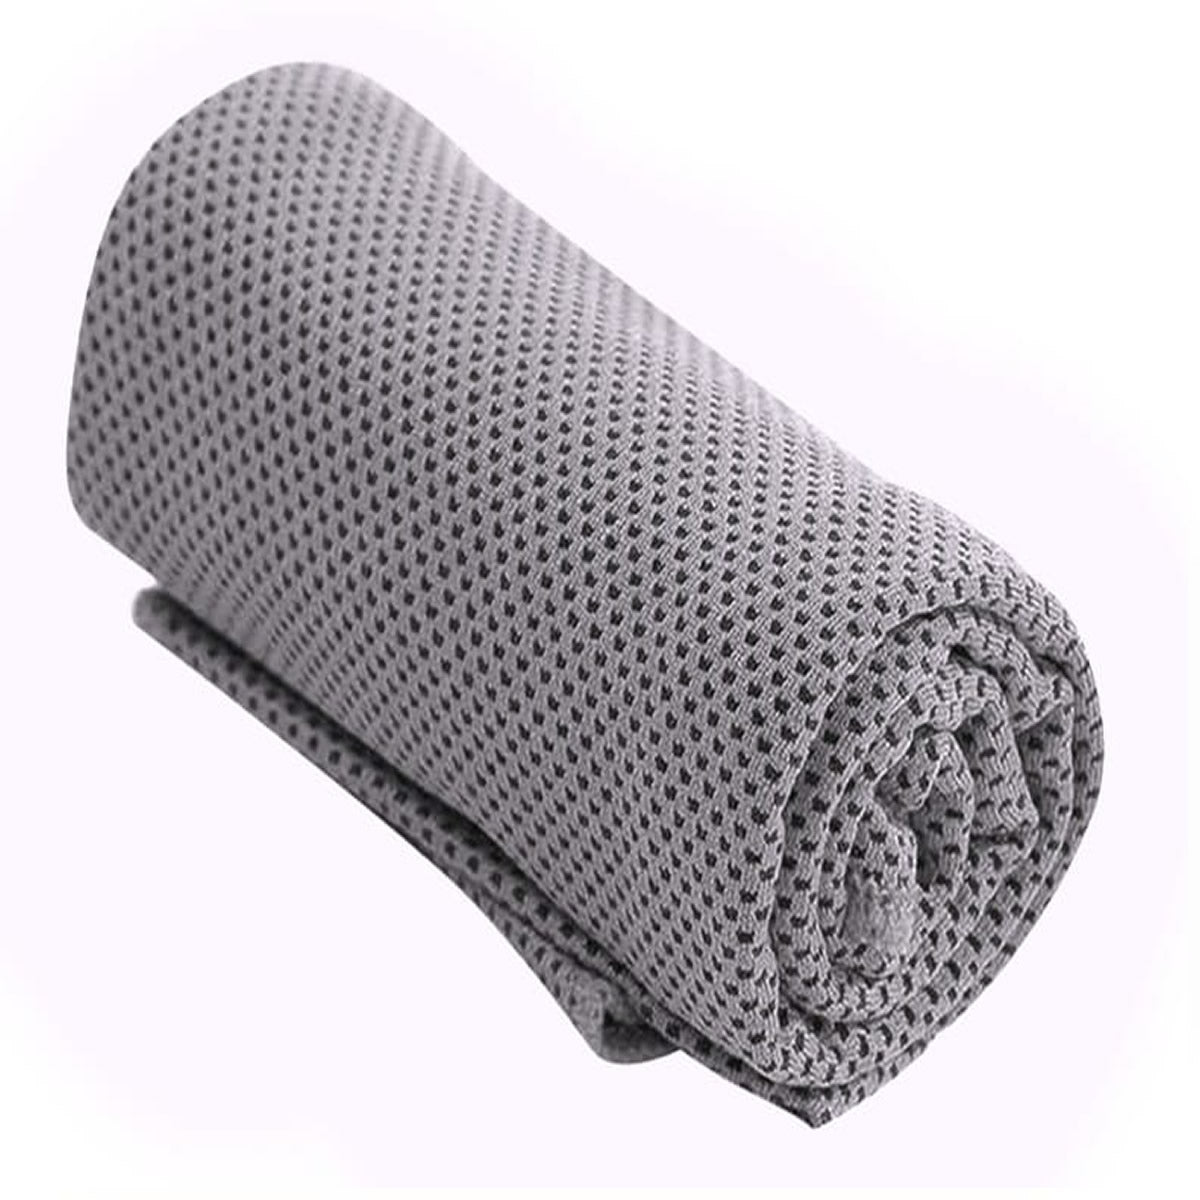 G-101 - Half Sized Cooling Towel